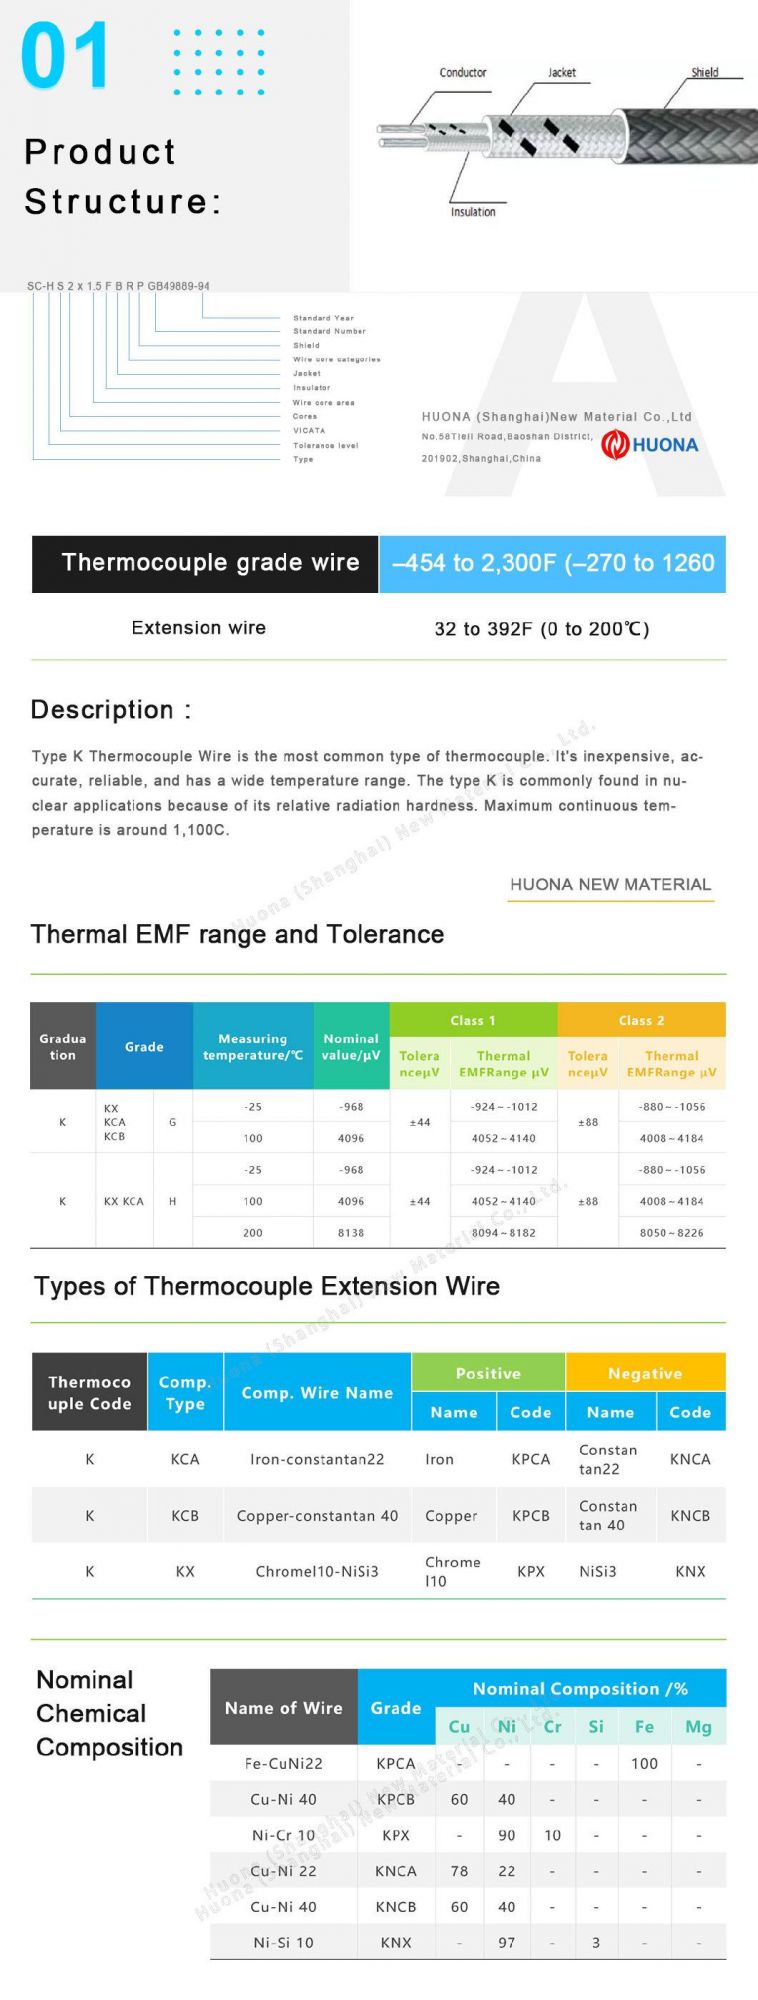 Kx Thermocouple Extension Wire / Cable 2*7*0.3mm with Glass Fiber Insulation